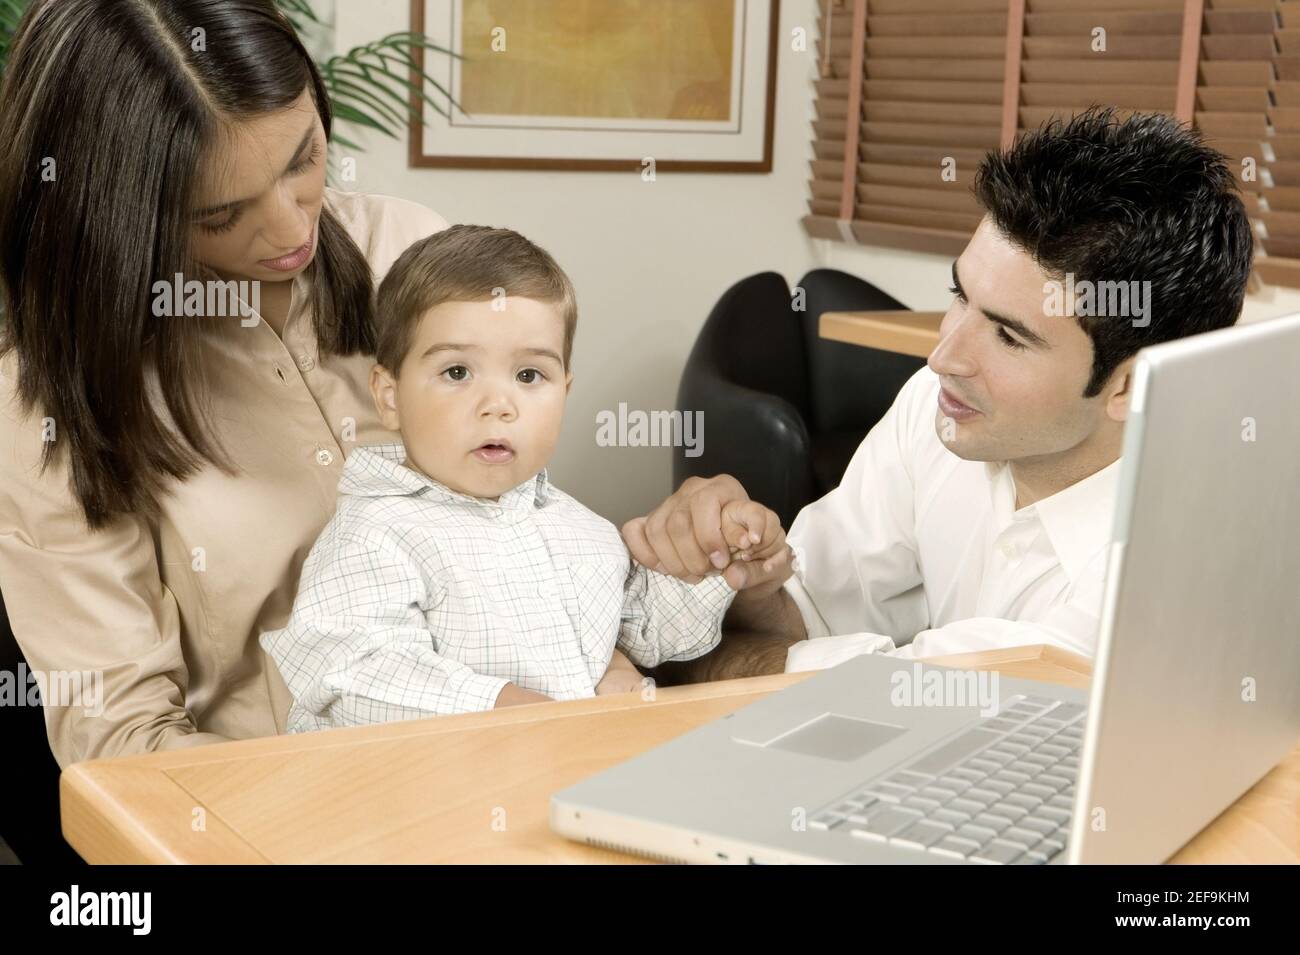 Portrait of a baby boy sitting in front of a laptop with his parents Stock Photo